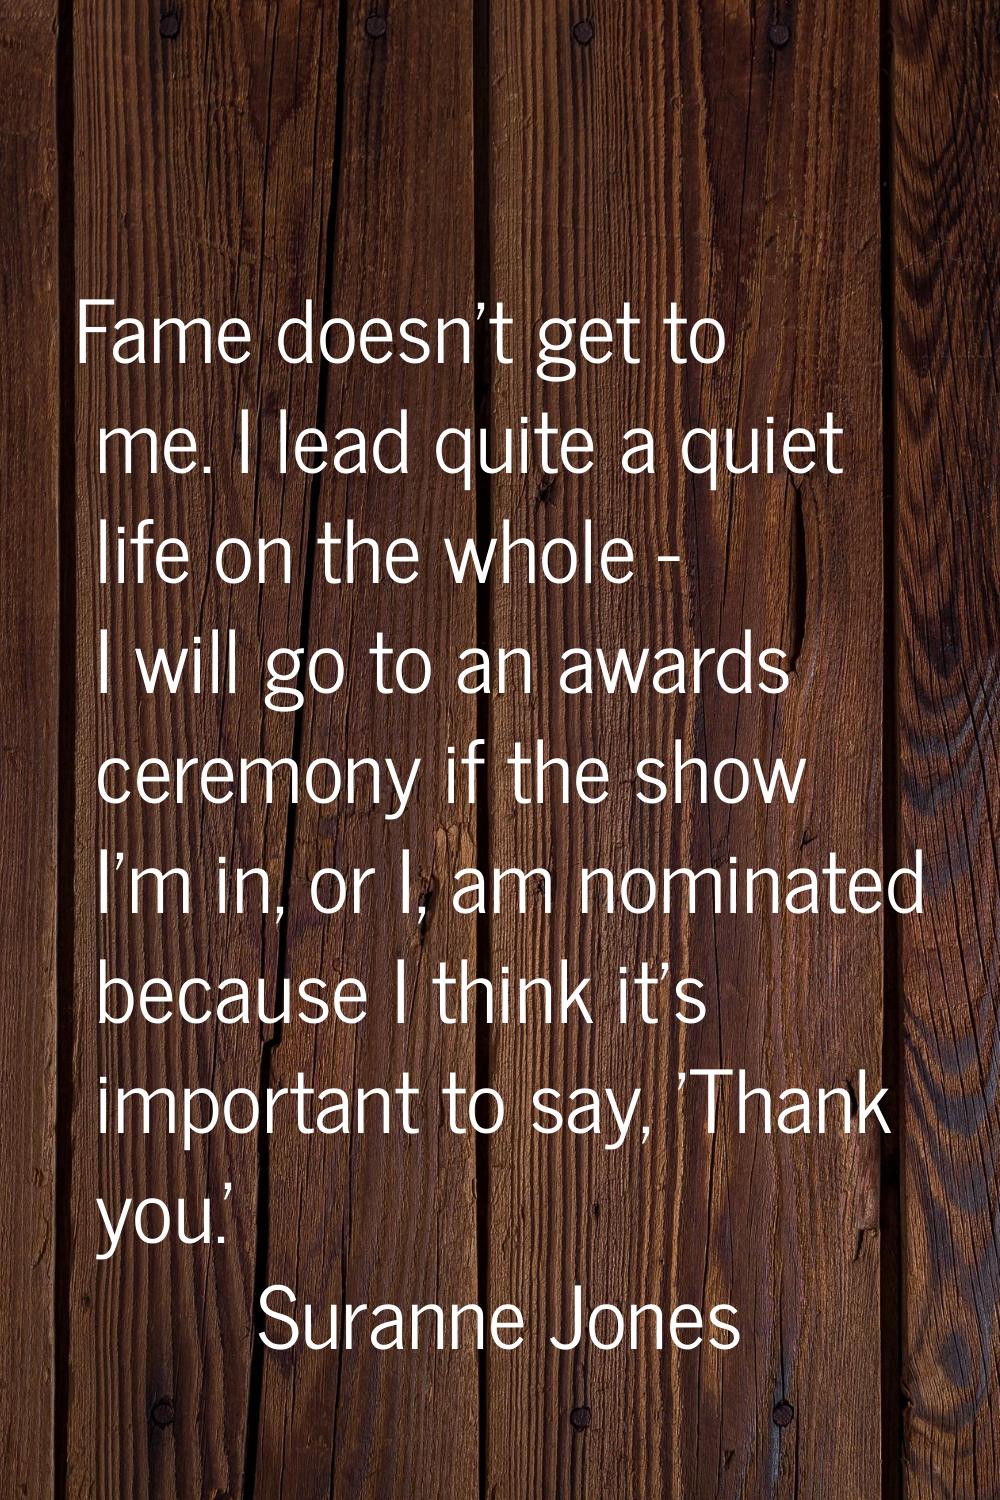 Fame doesn't get to me. I lead quite a quiet life on the whole - I will go to an awards ceremony if